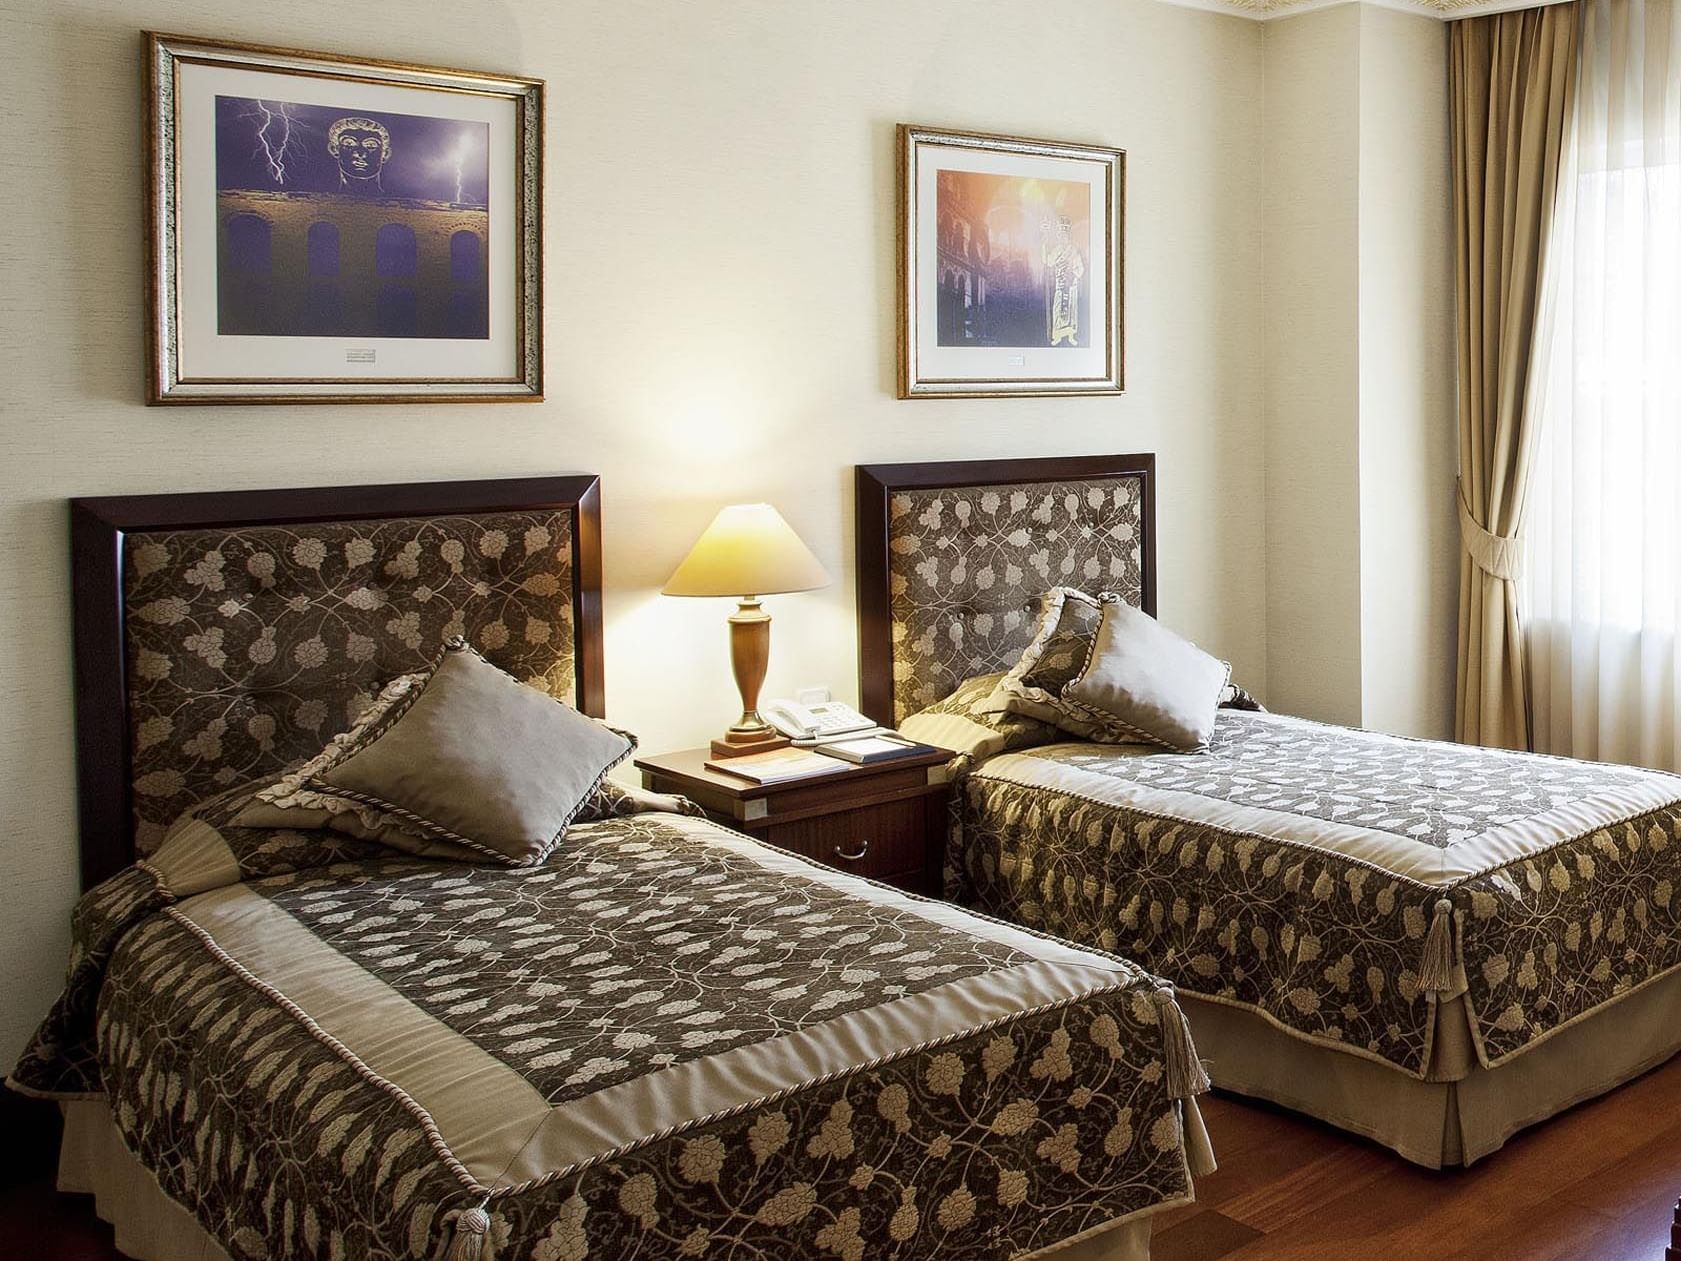 Unwind After Exploring Istanbul's History: Eresin Standard Room. Your haven in the heart of the city.